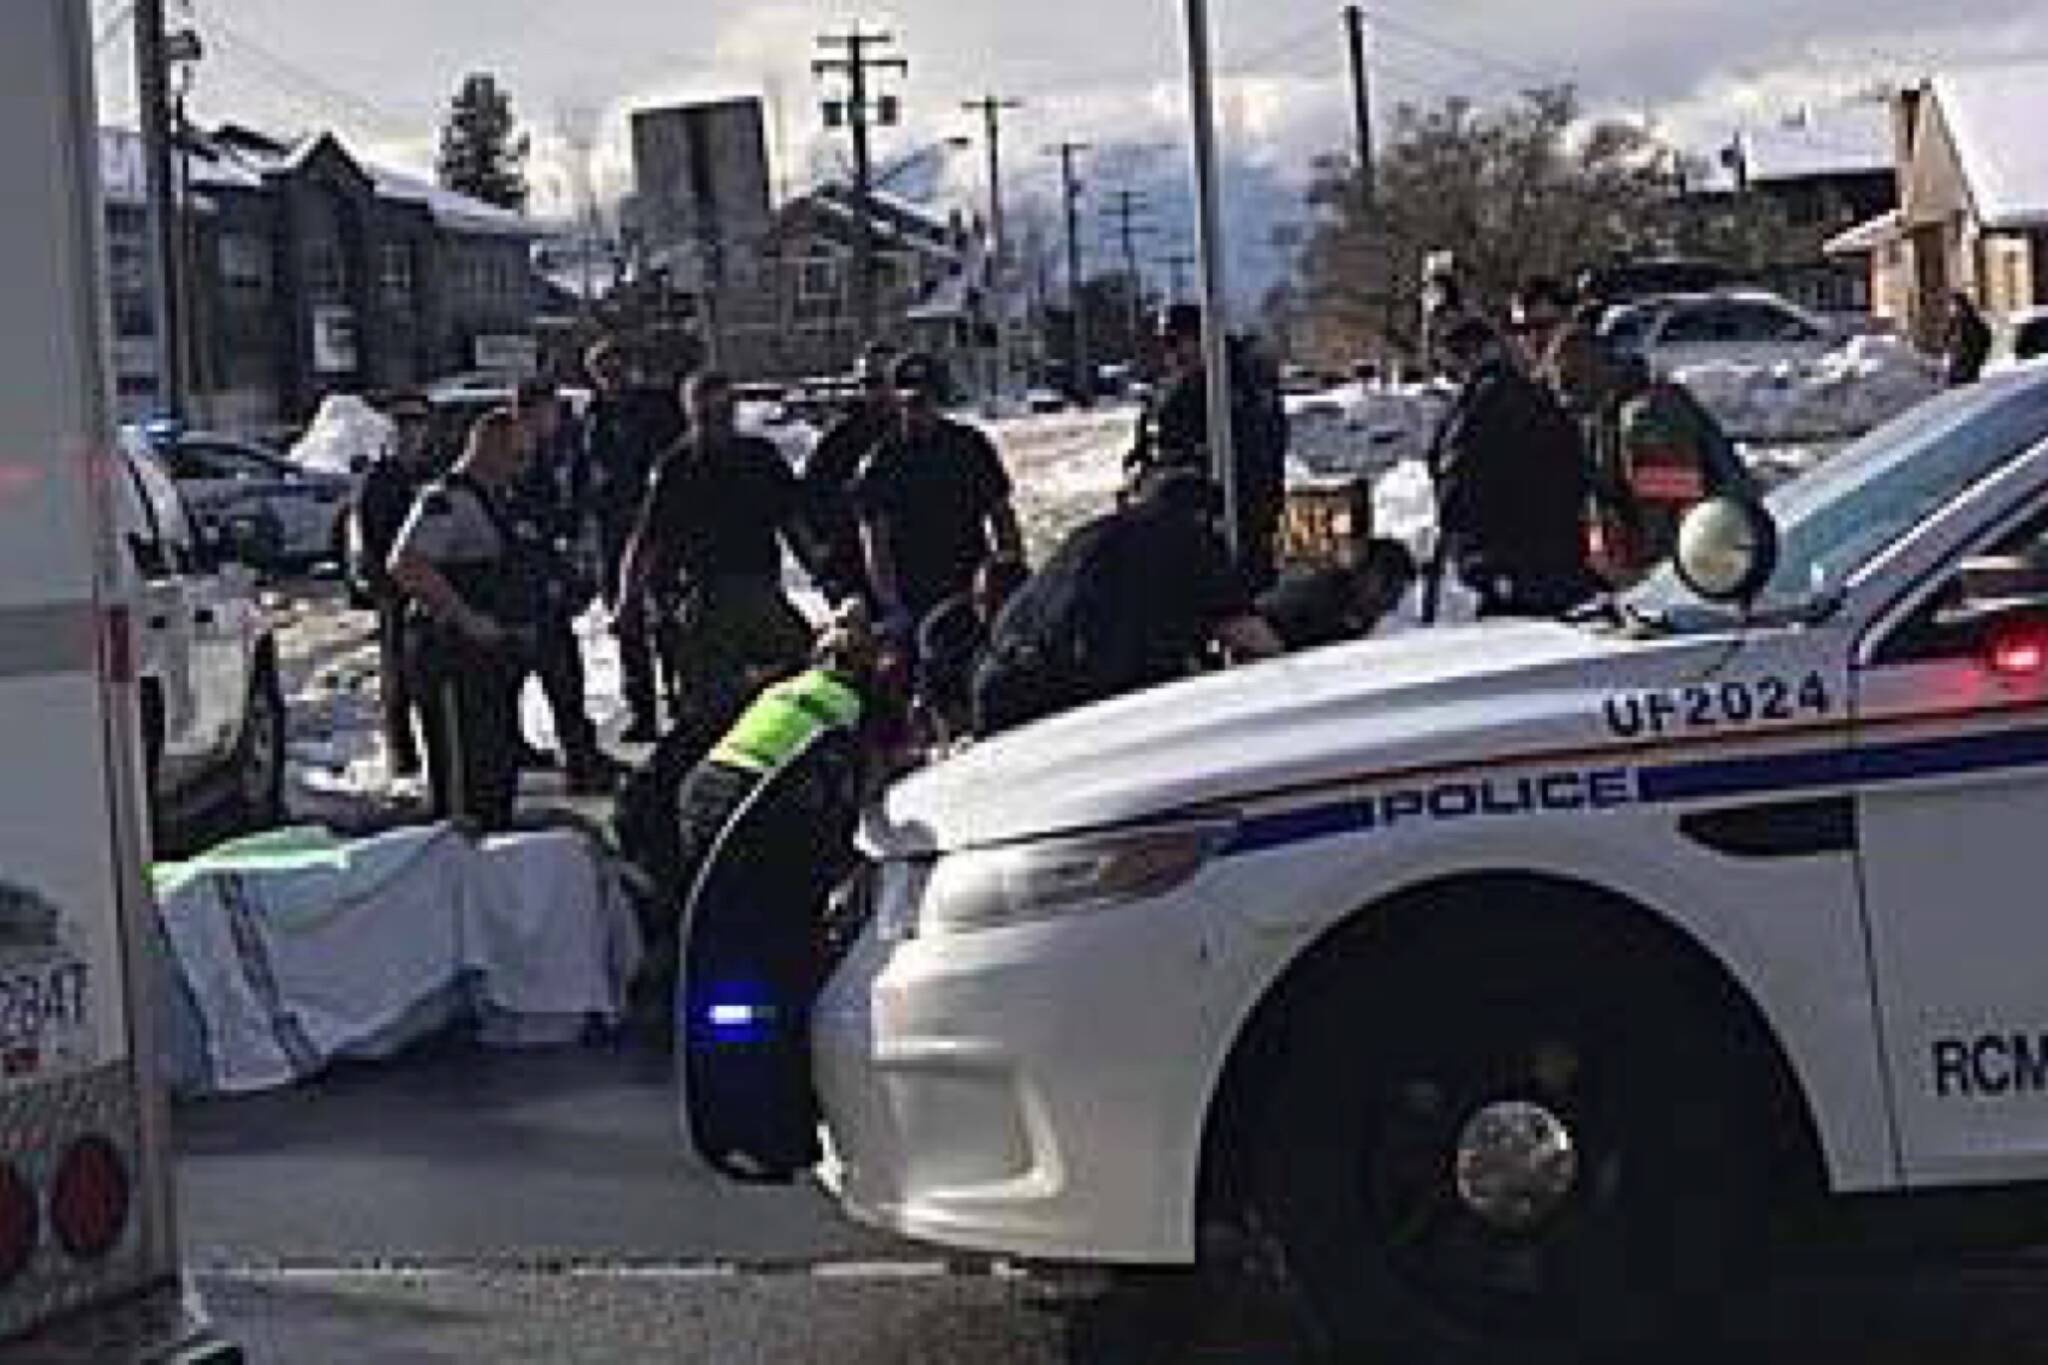 Paramedics at the scene where David Meadows died following a struggle with police on Vedder Road in Chilliwack on Feb. 24, 2018. (Submitted photo)